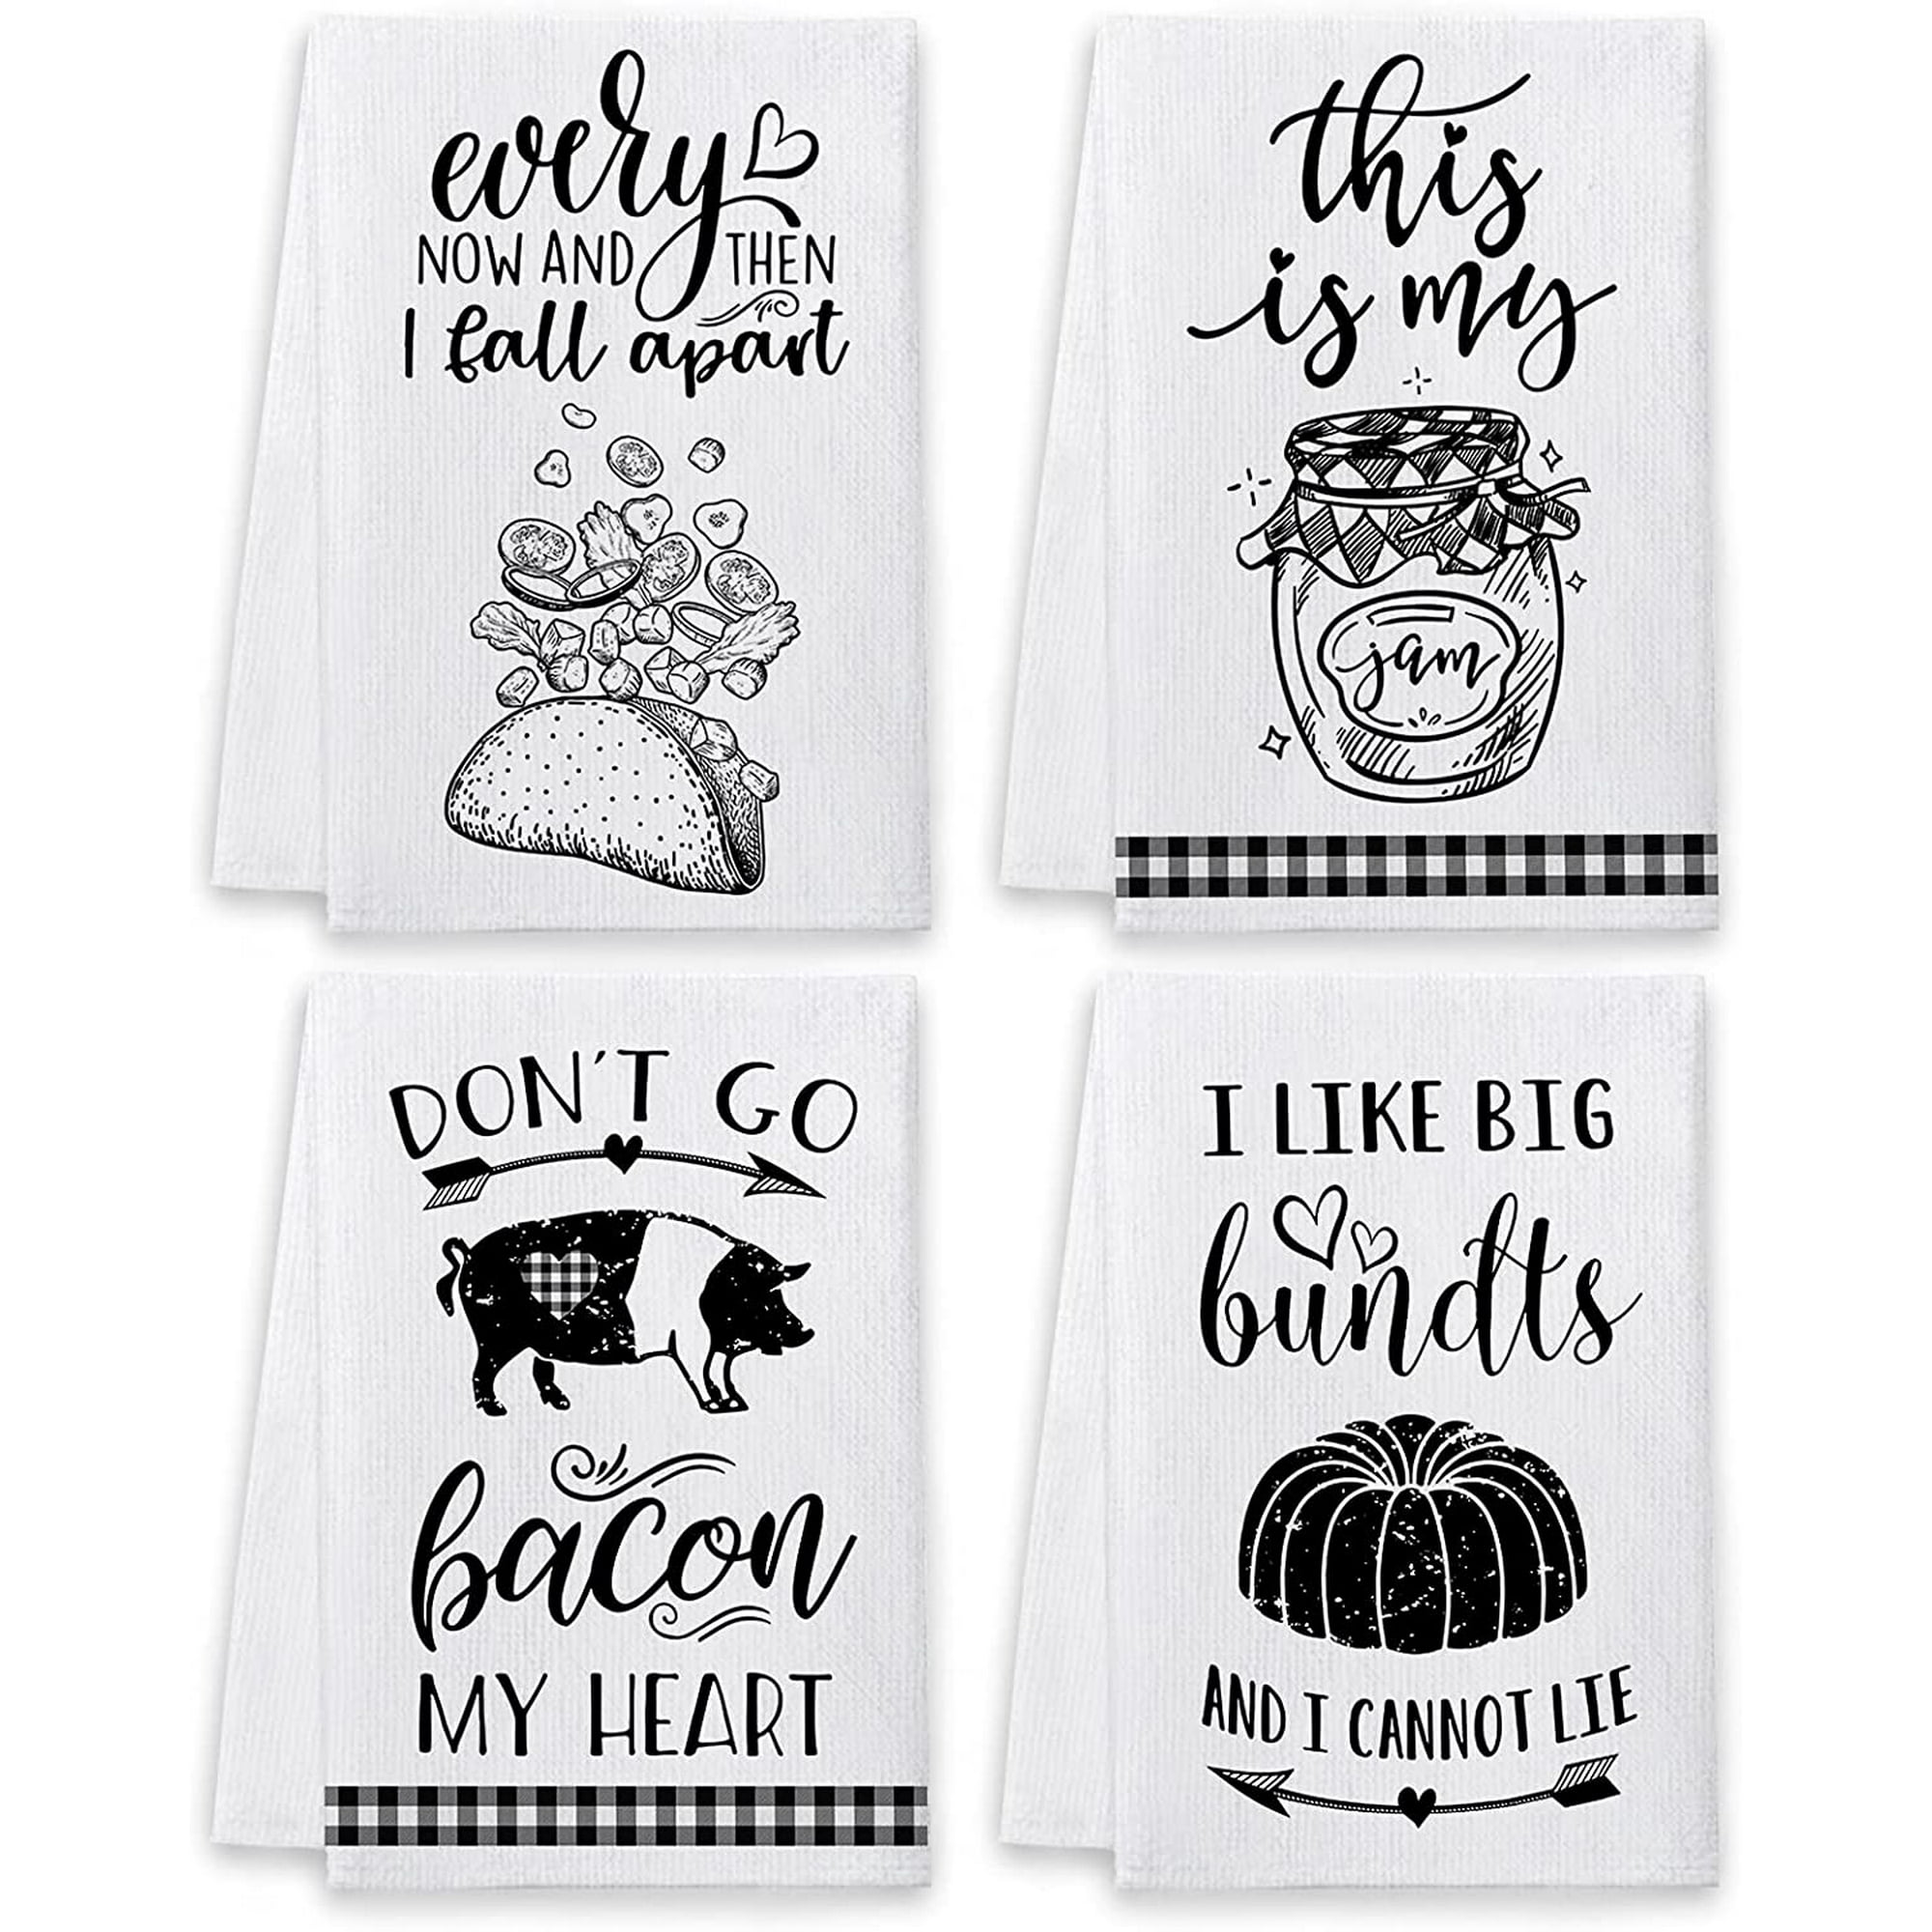 Funny Kitchen Towels, Cute Dish Towels and Dishcloths Sets of 4 with Sayings  Quotes, Fun Taco Jam Bacon Bundts tive Tea Hand Towels Housewarming Gifts  Decor for New Home Bathroom | Walmart Canada